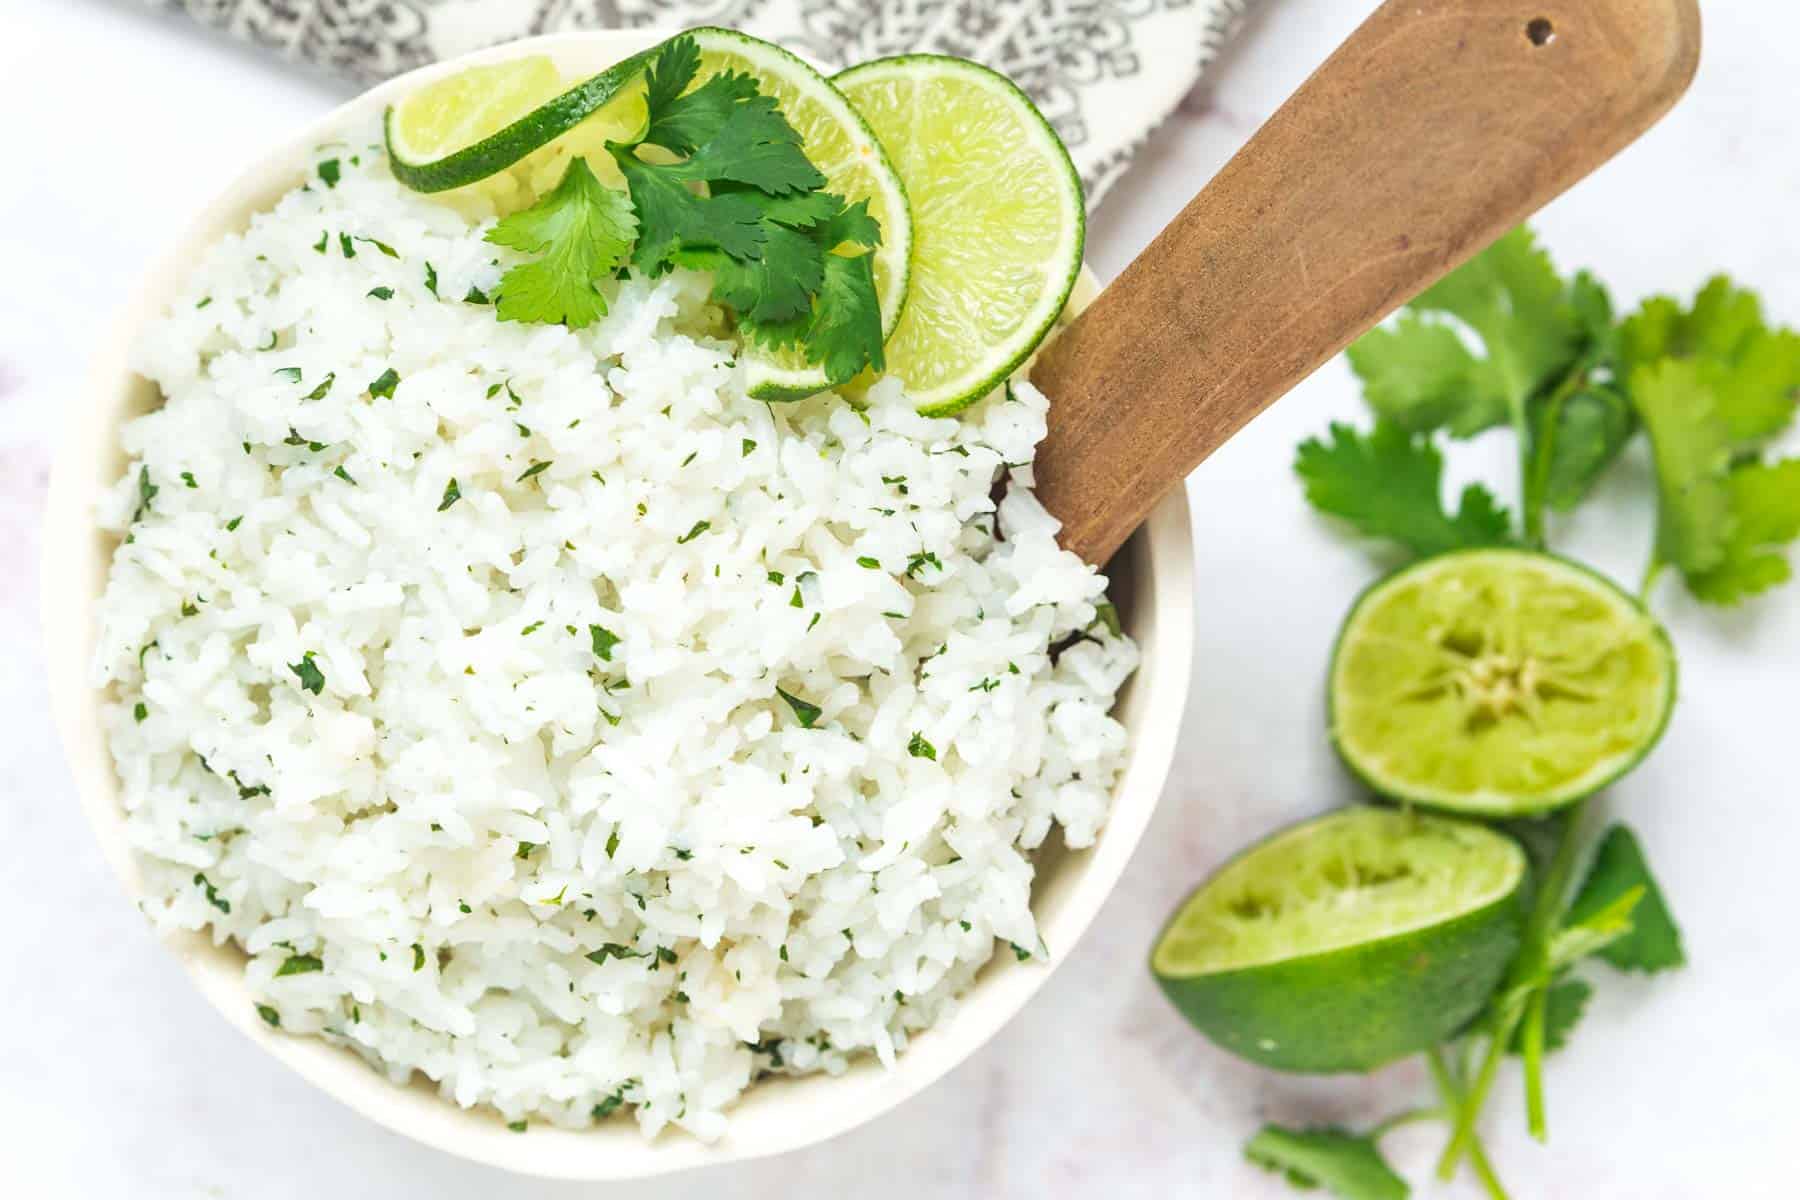 cilantro lime rice in a bowl with a serving spoon garnished with a sprig of cilantro and lime slices